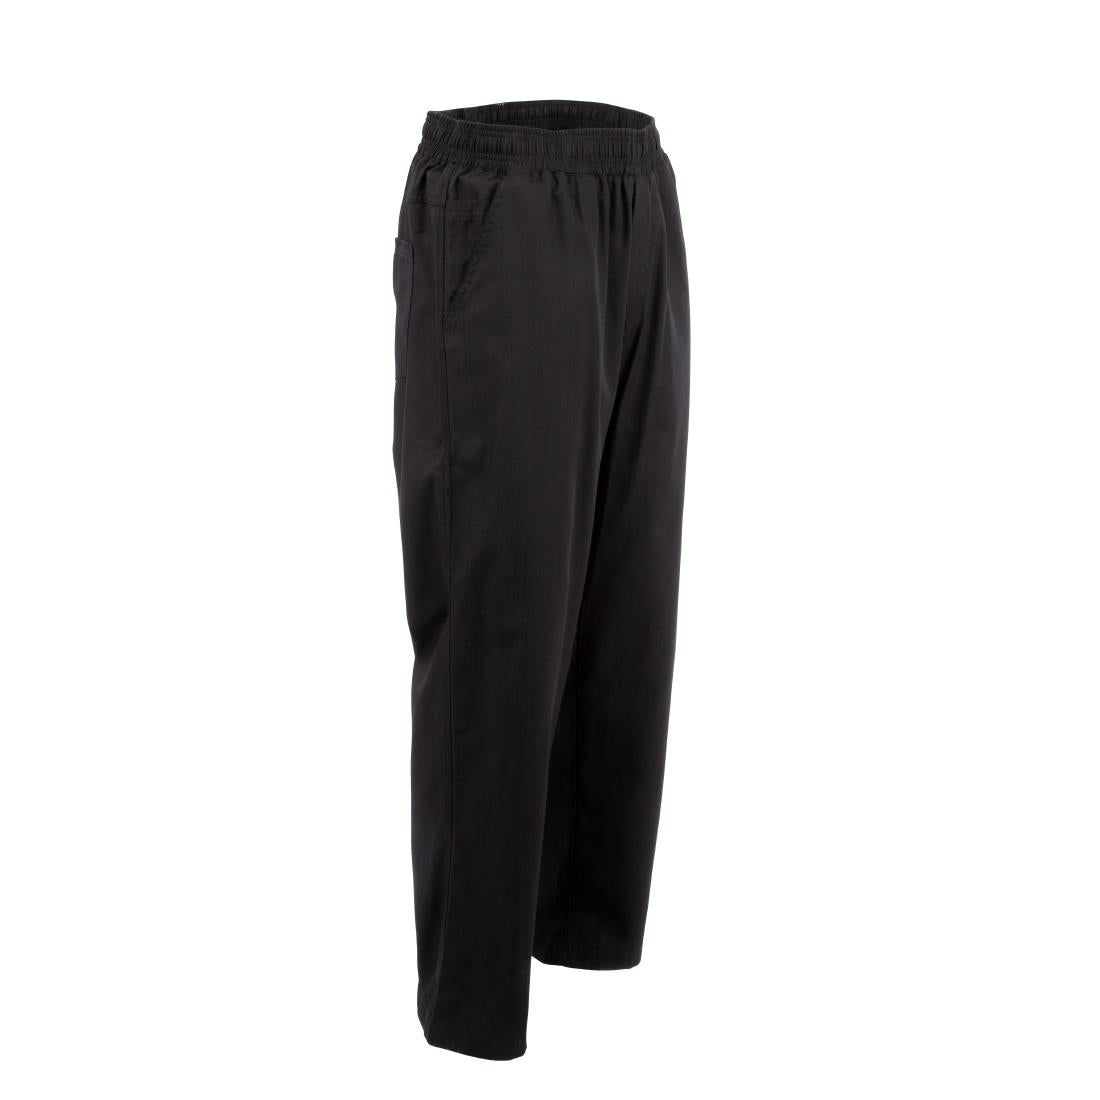 Chef Works Unisex Better Built Baggy Chefs Trousers Black JD Catering Equipment Solutions Ltd